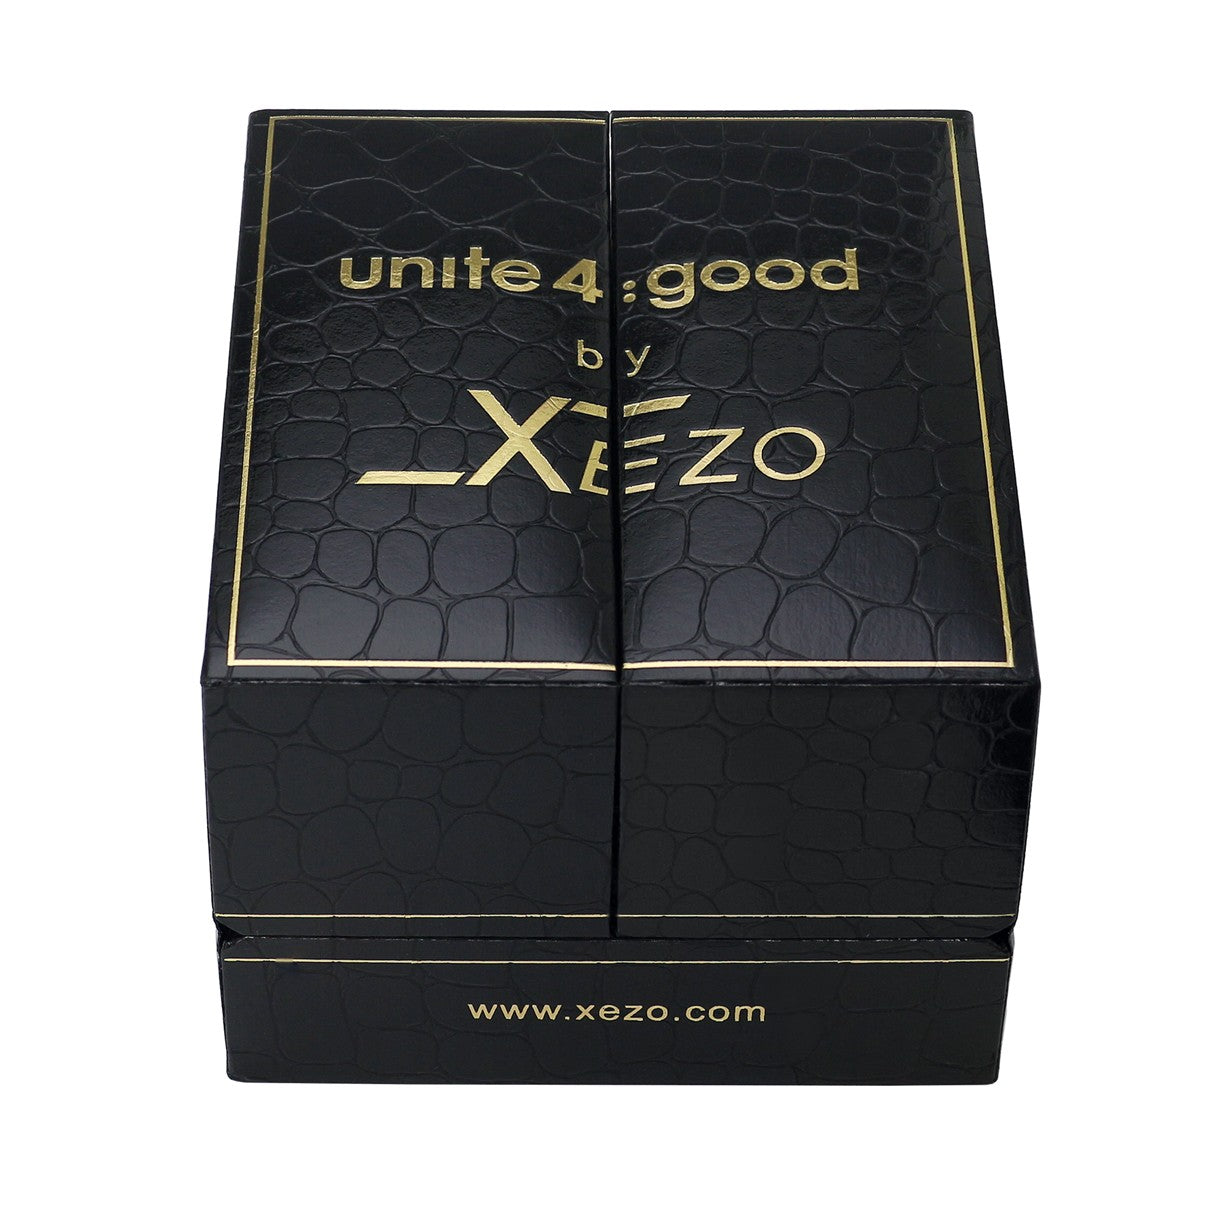 Xezo - Black gift box of the Air Commando D45-S watch with "unite 4 : good by Xezo" printed on top and "www.xezo.com" printed on the front 